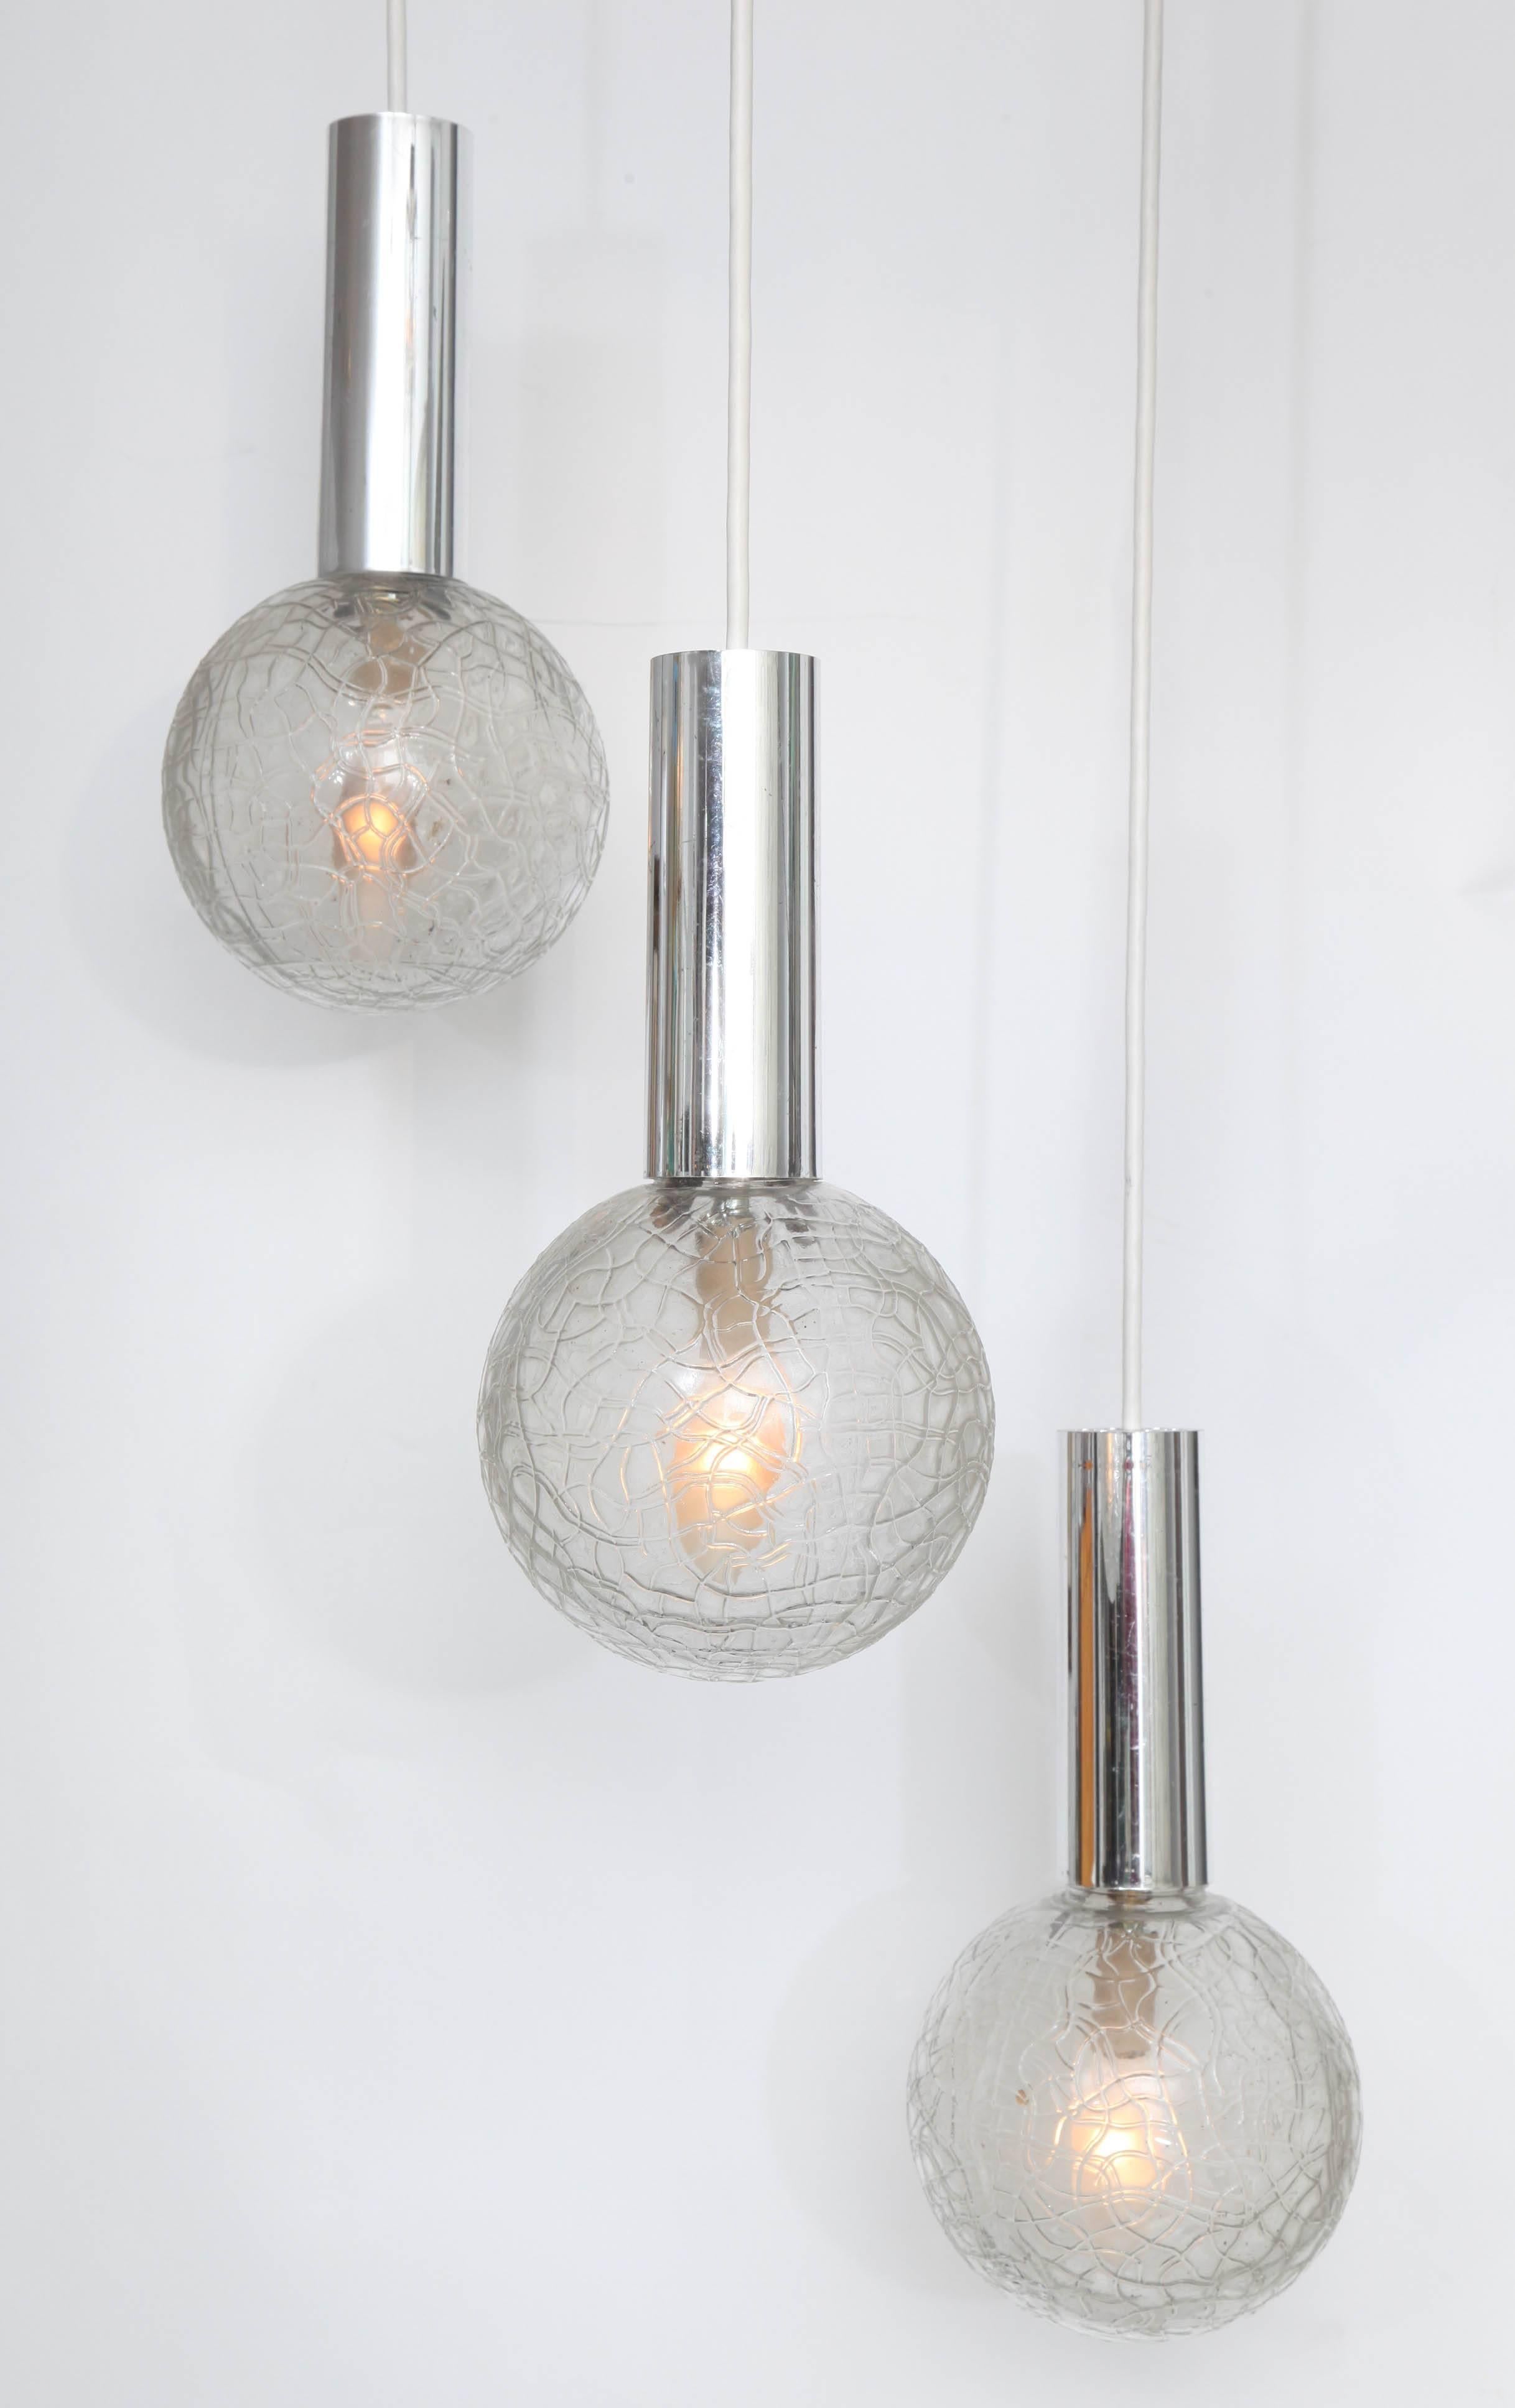 A great crackle glass Mid-Century pendant light fixture with three glass globes and chrome tubular fittings.